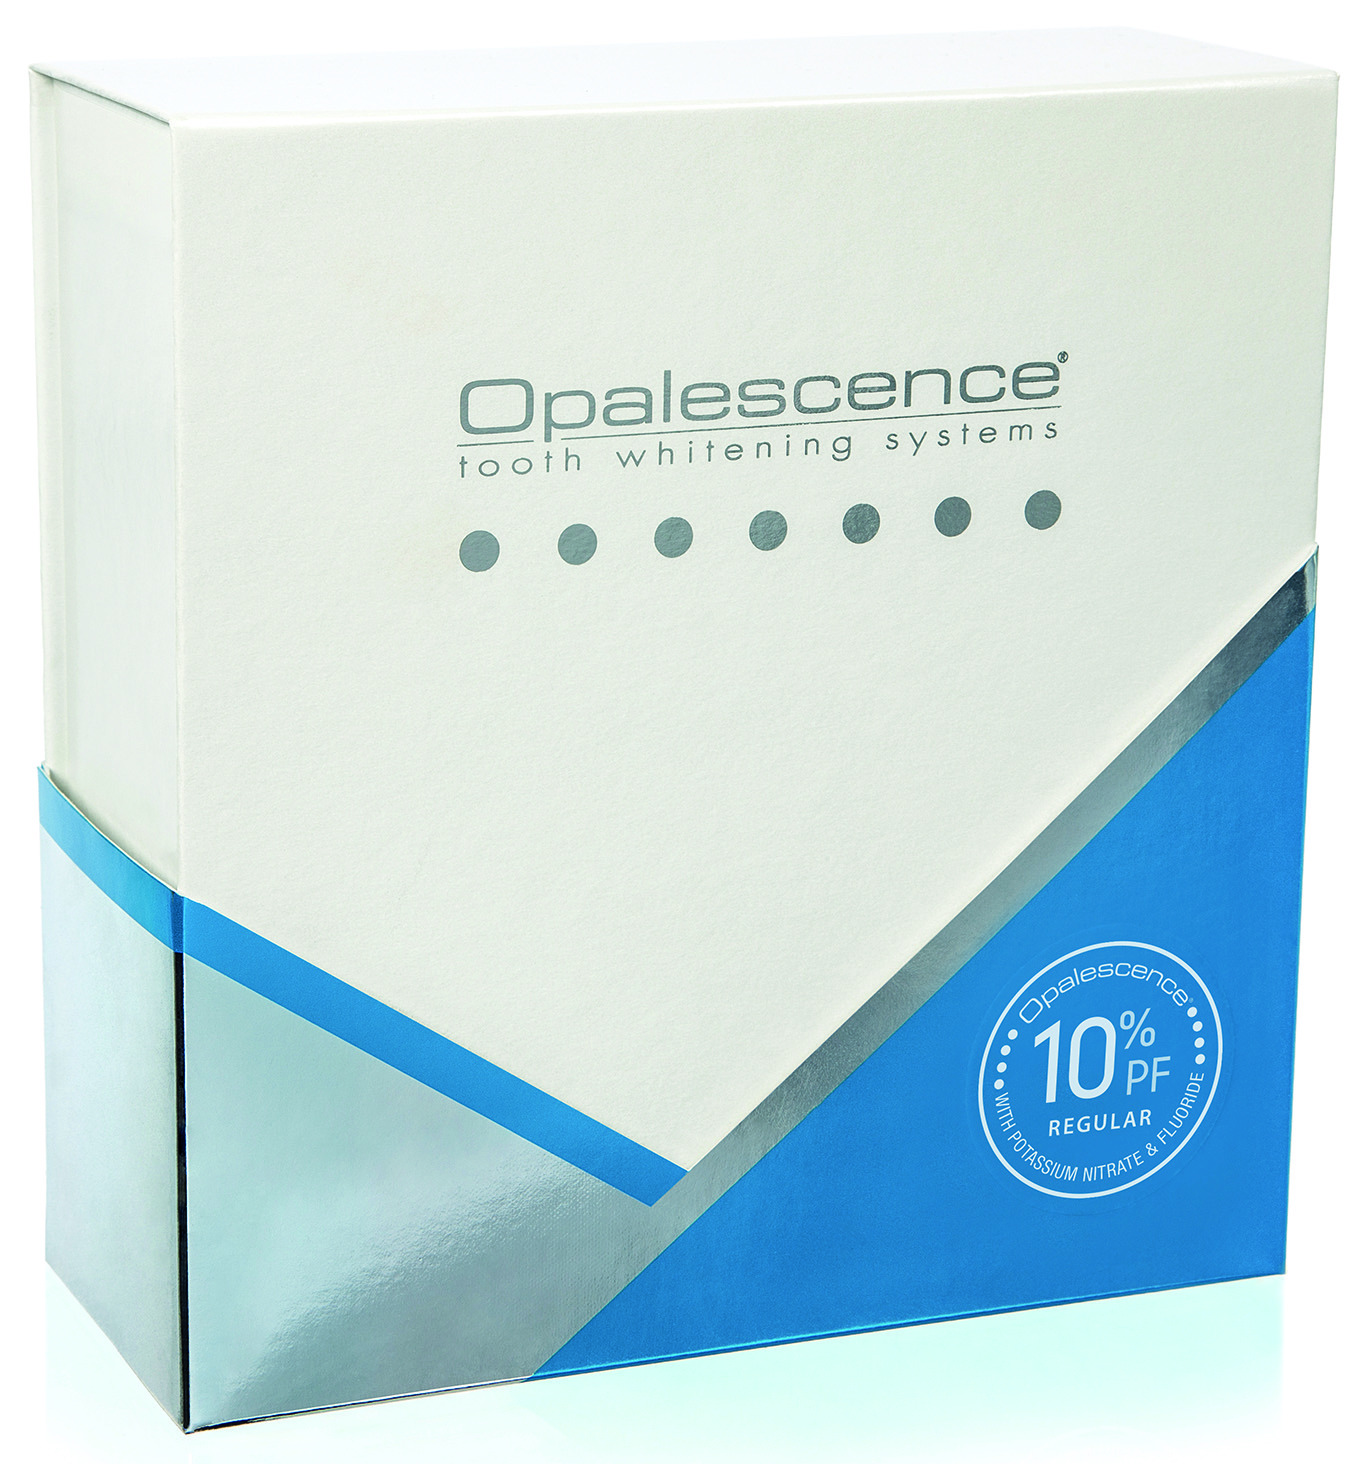 Sbiancante OPALESCENCE PF PATIENT KIT - PF 10% Insapore 5366